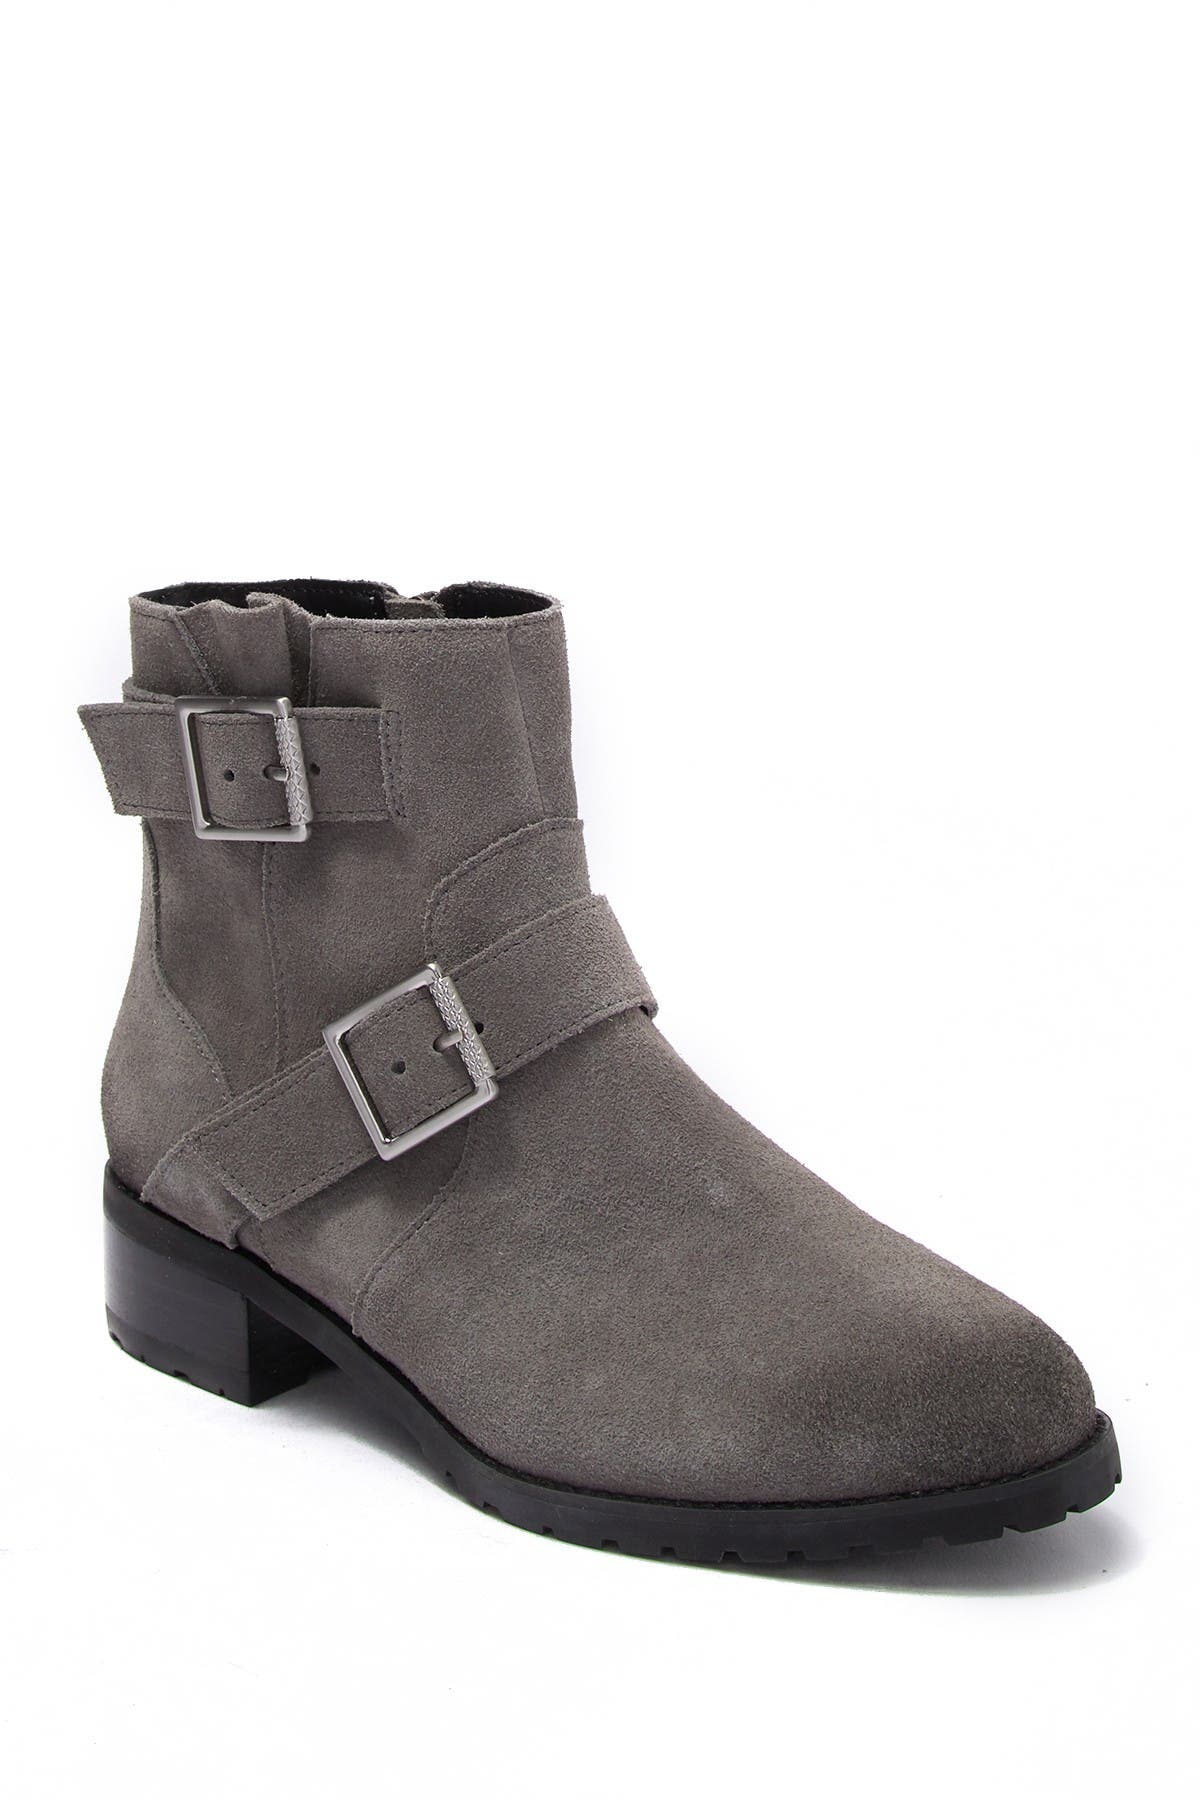 nordstrom rack womens snow boots